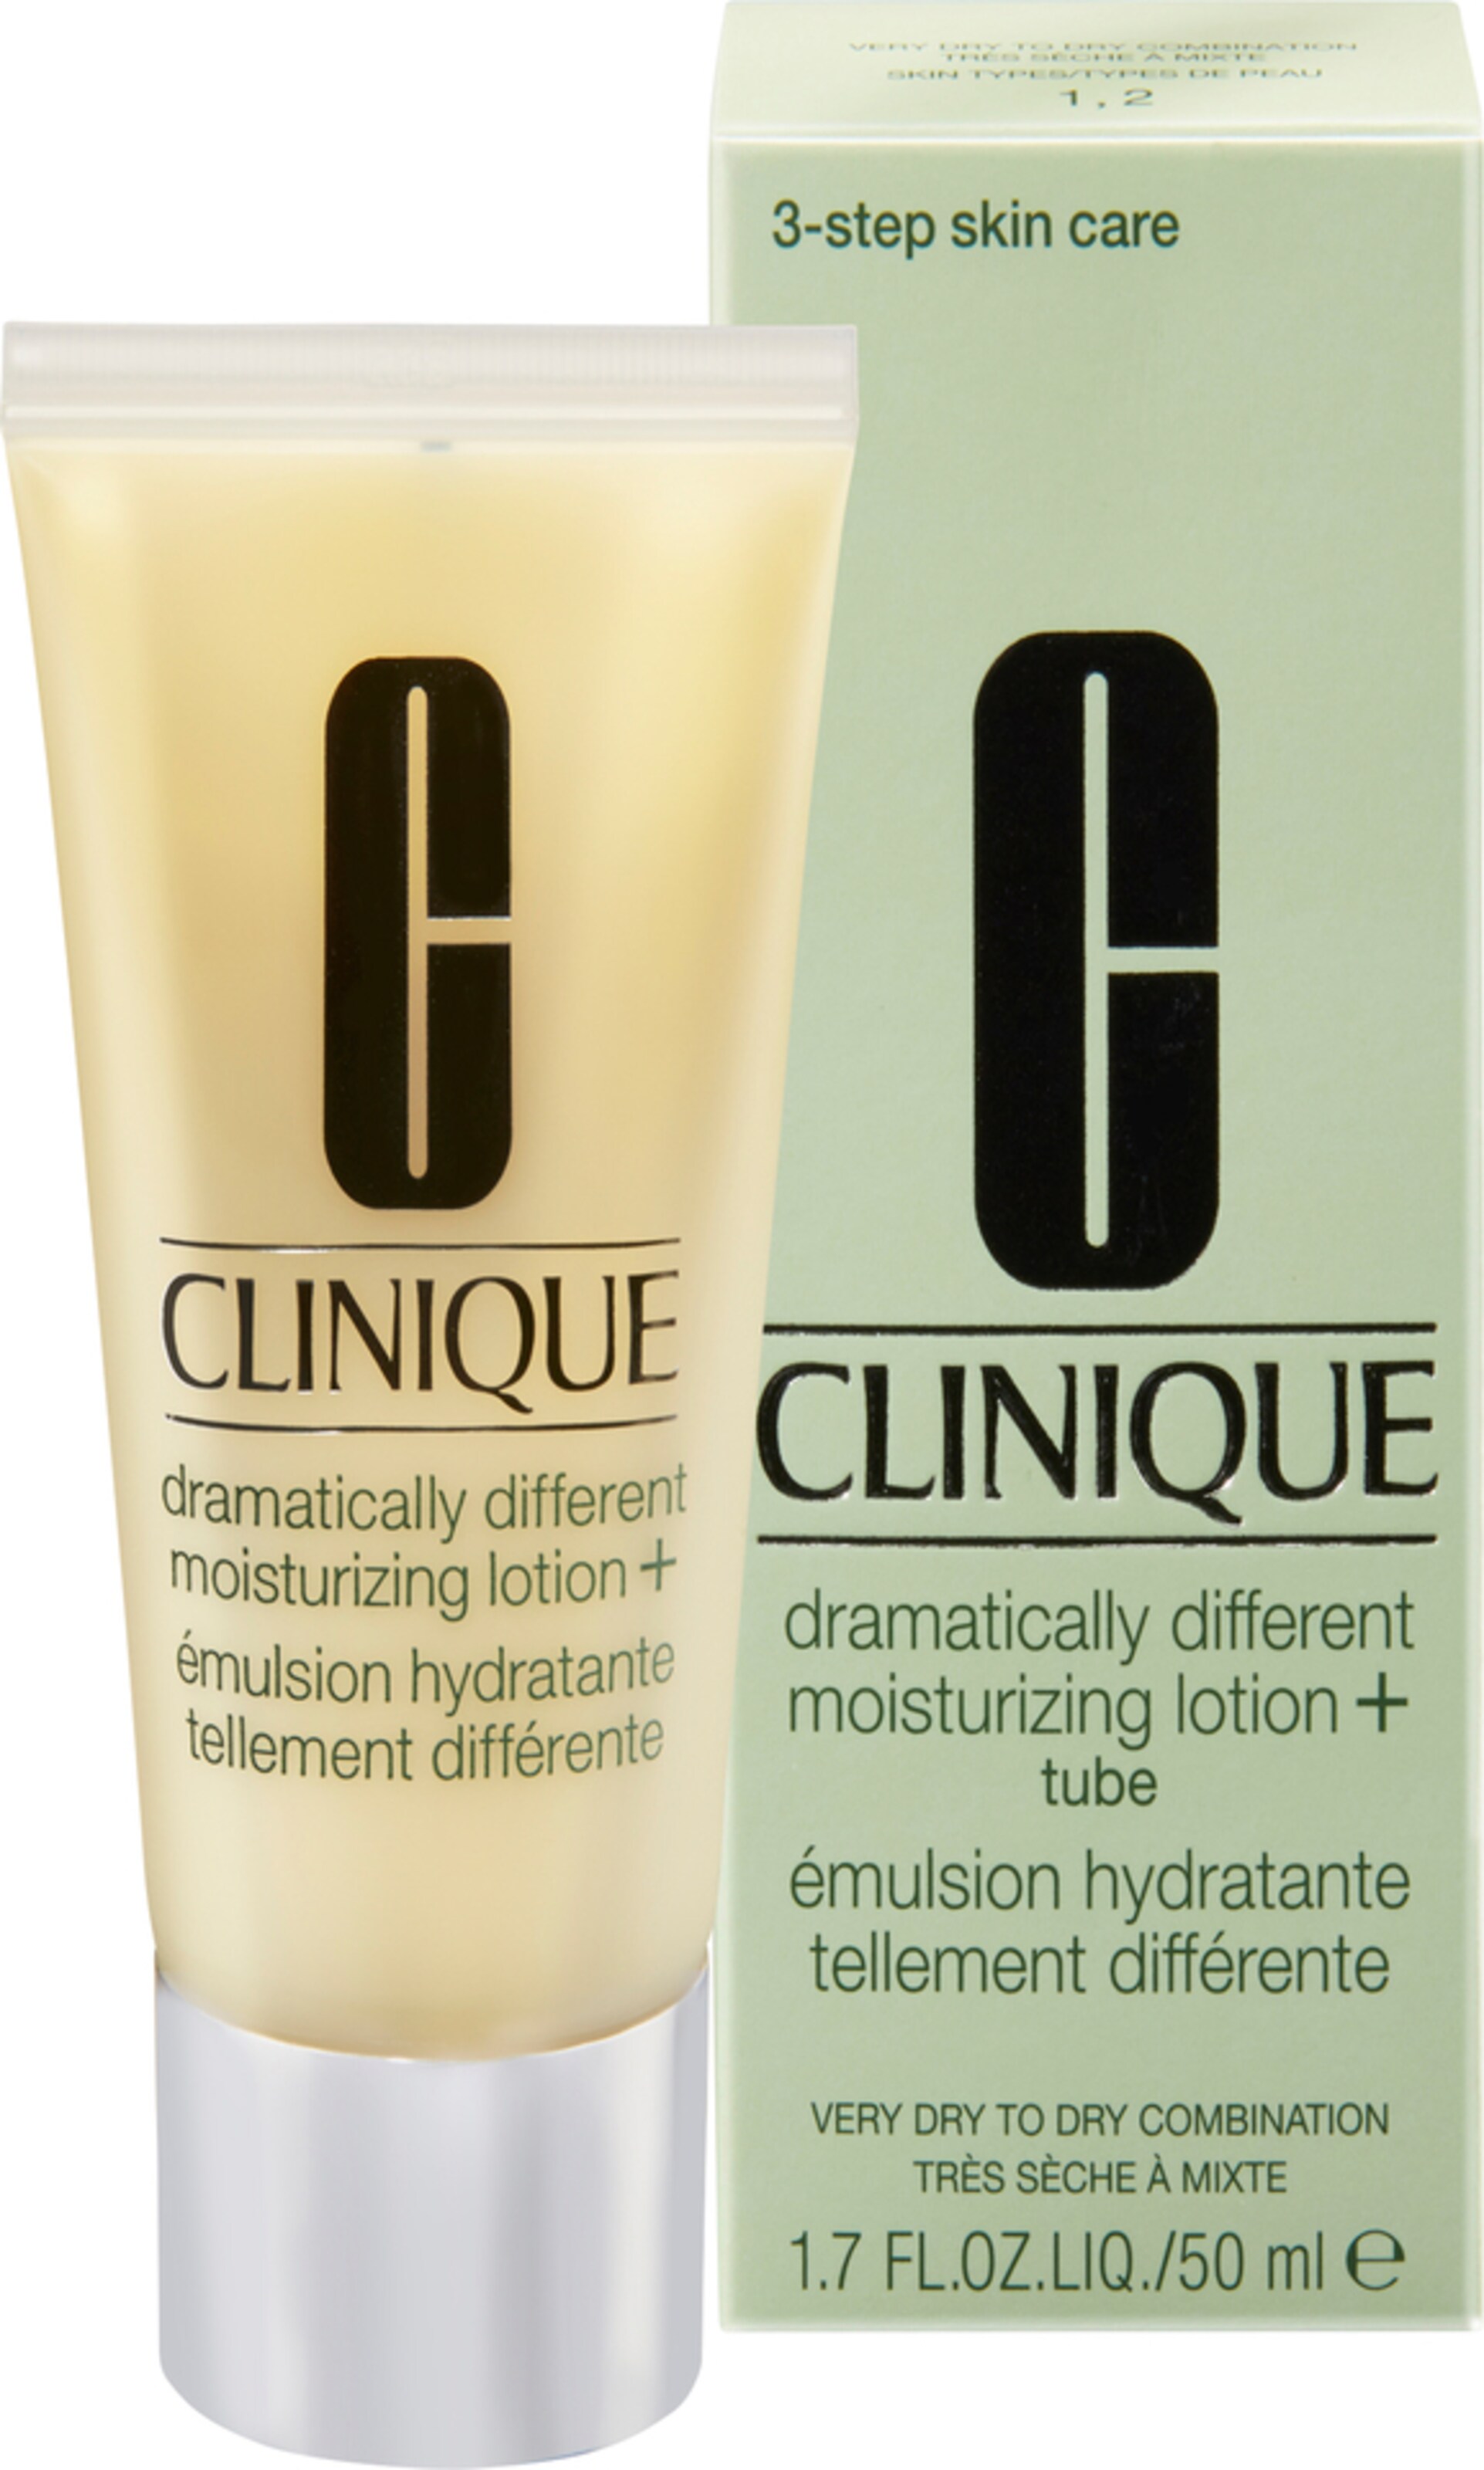 CLINIQUE Dramatically Different Moisturizing Lotion+ Gesichtslotion in Gelb 